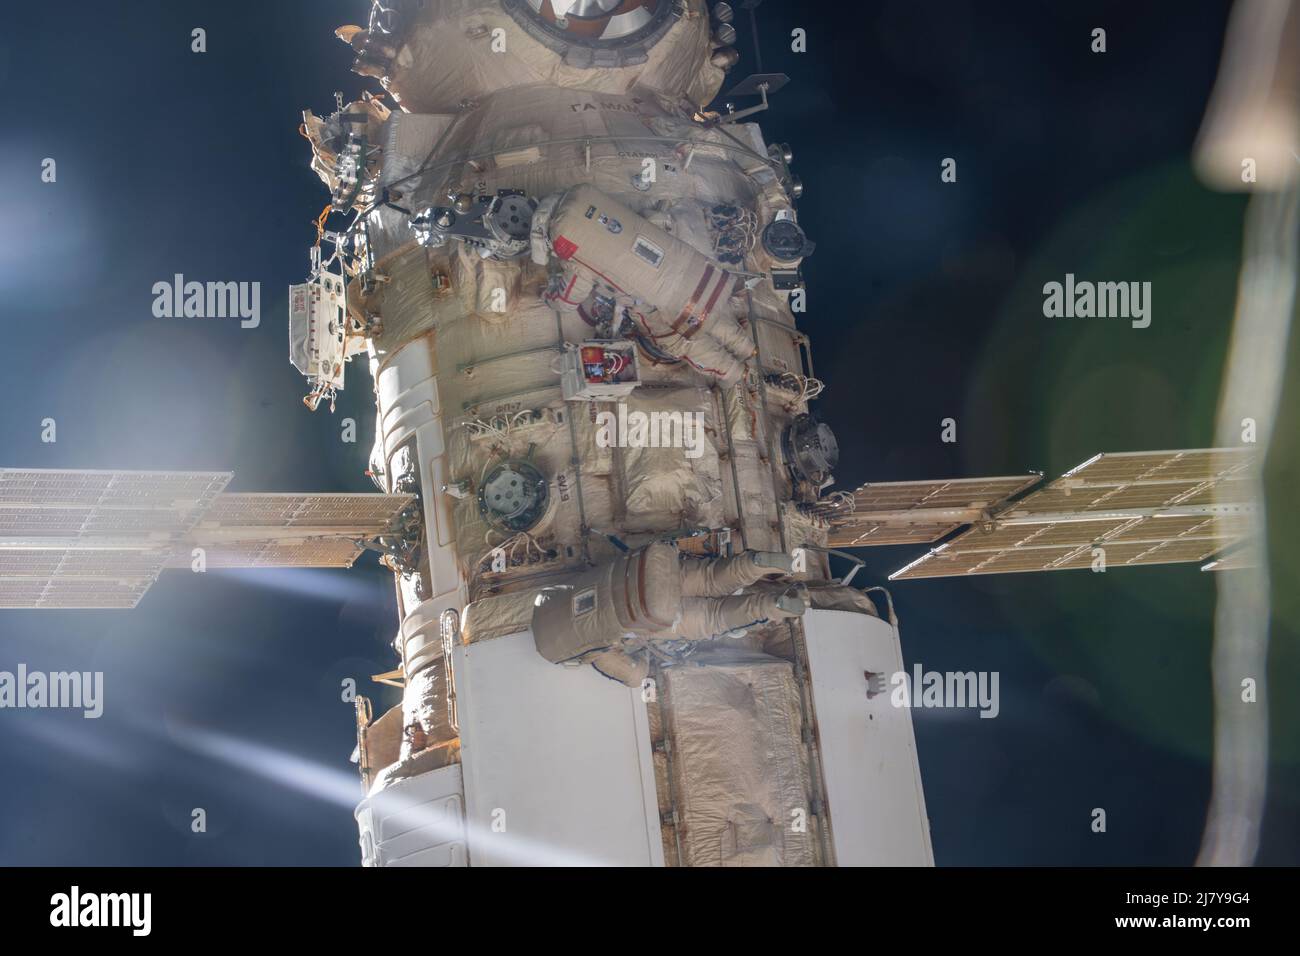 Roscosmos cosmonauts Oleg Artemyev and Denis Matveev attached to the Nauka multipurpose laboratory module during a seven-hour and 42-minute spacewalk to activate the European robotic arm on the International Space Station April 28, 2022 in Earth Orbit. Stock Photo